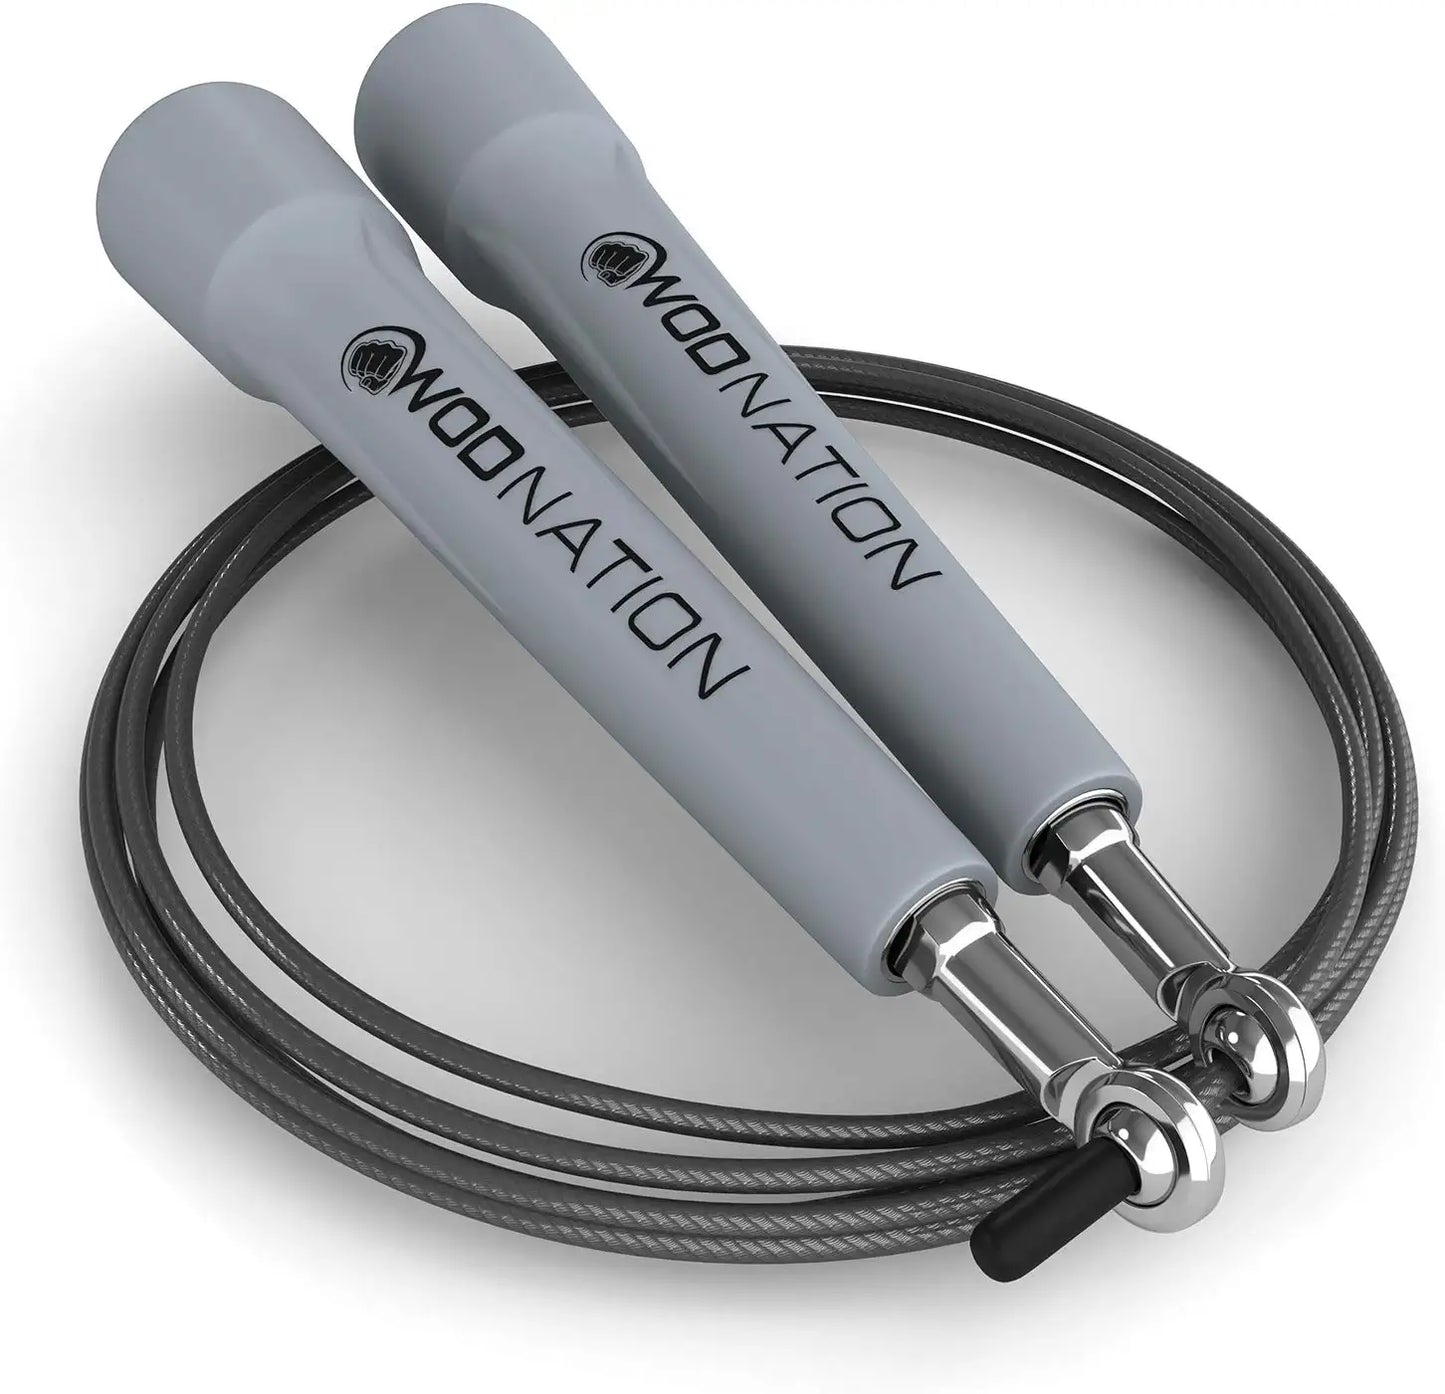 WOD Nation Speed Adjustable Blazing Fast Jumping/Jump Rope -  for  Endurance Workout Boxing, MMA, Martial Arts or Just Staying Fit - for Men, Women and Children (Grey)